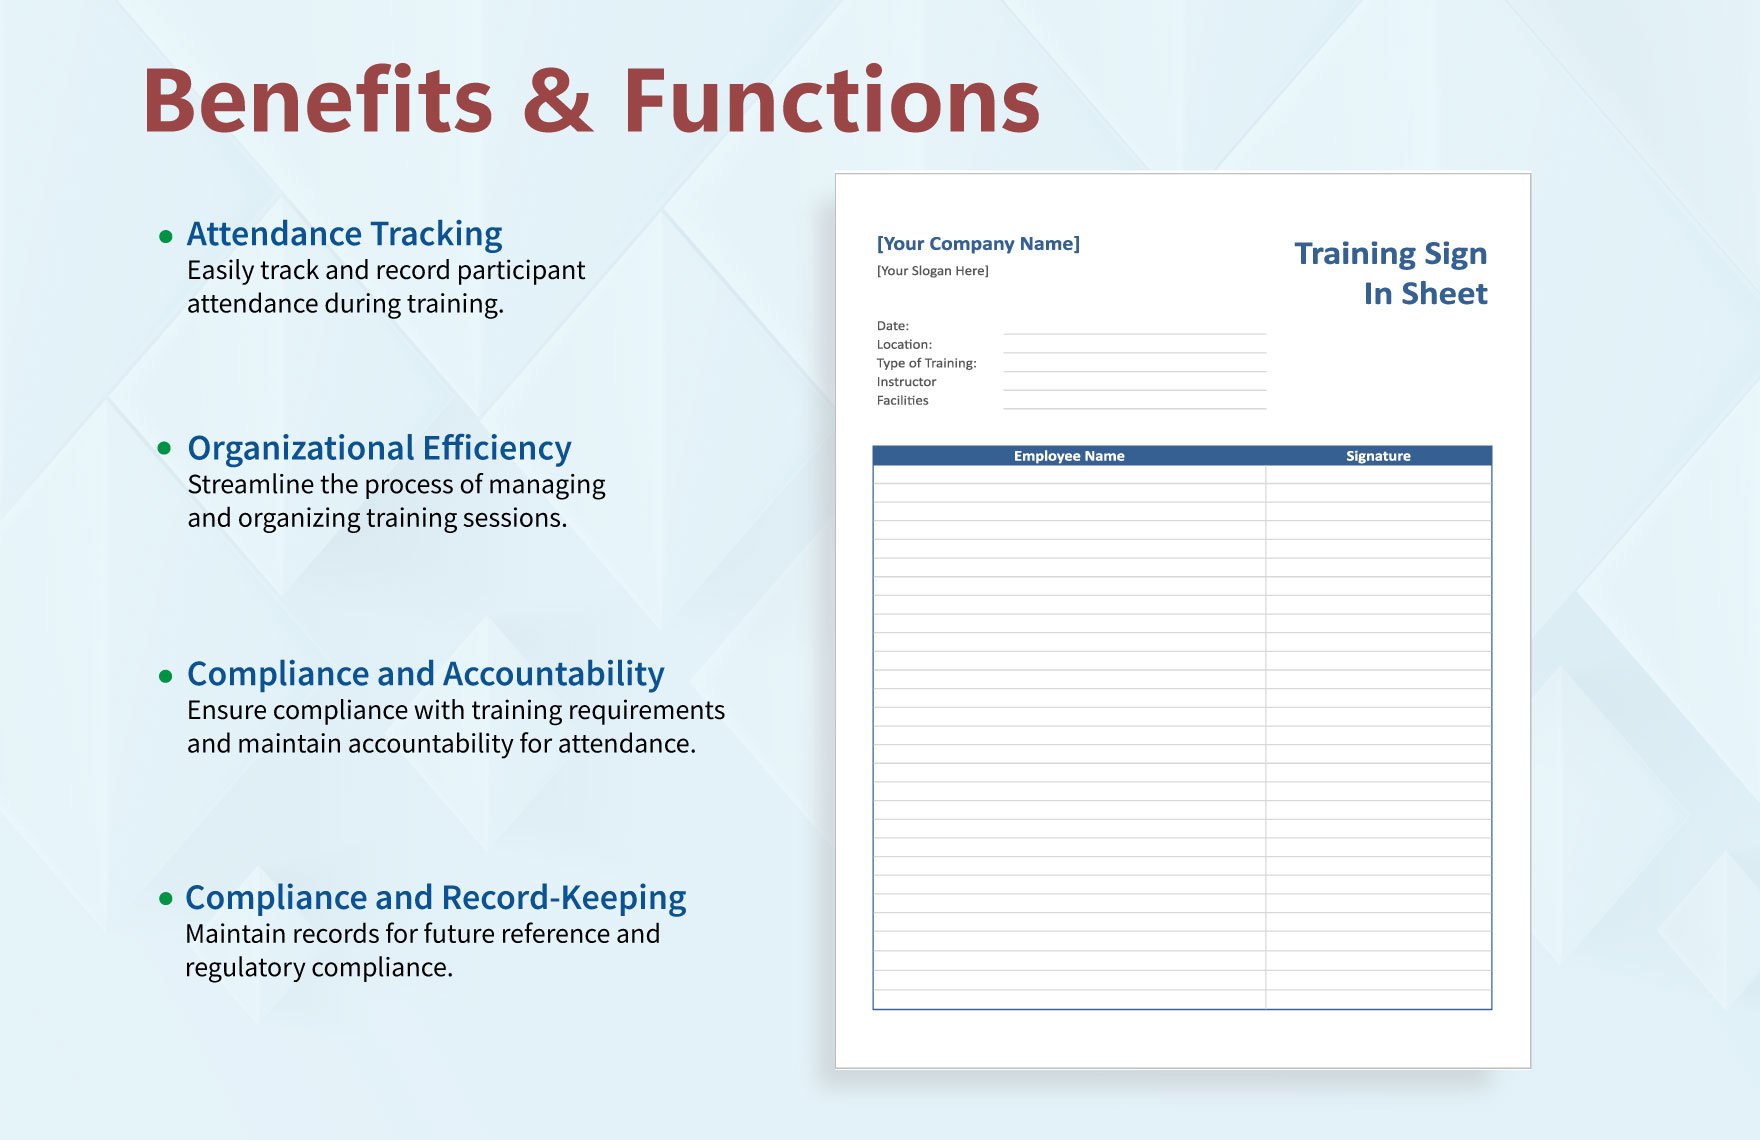 Training Sign in Sheet Template